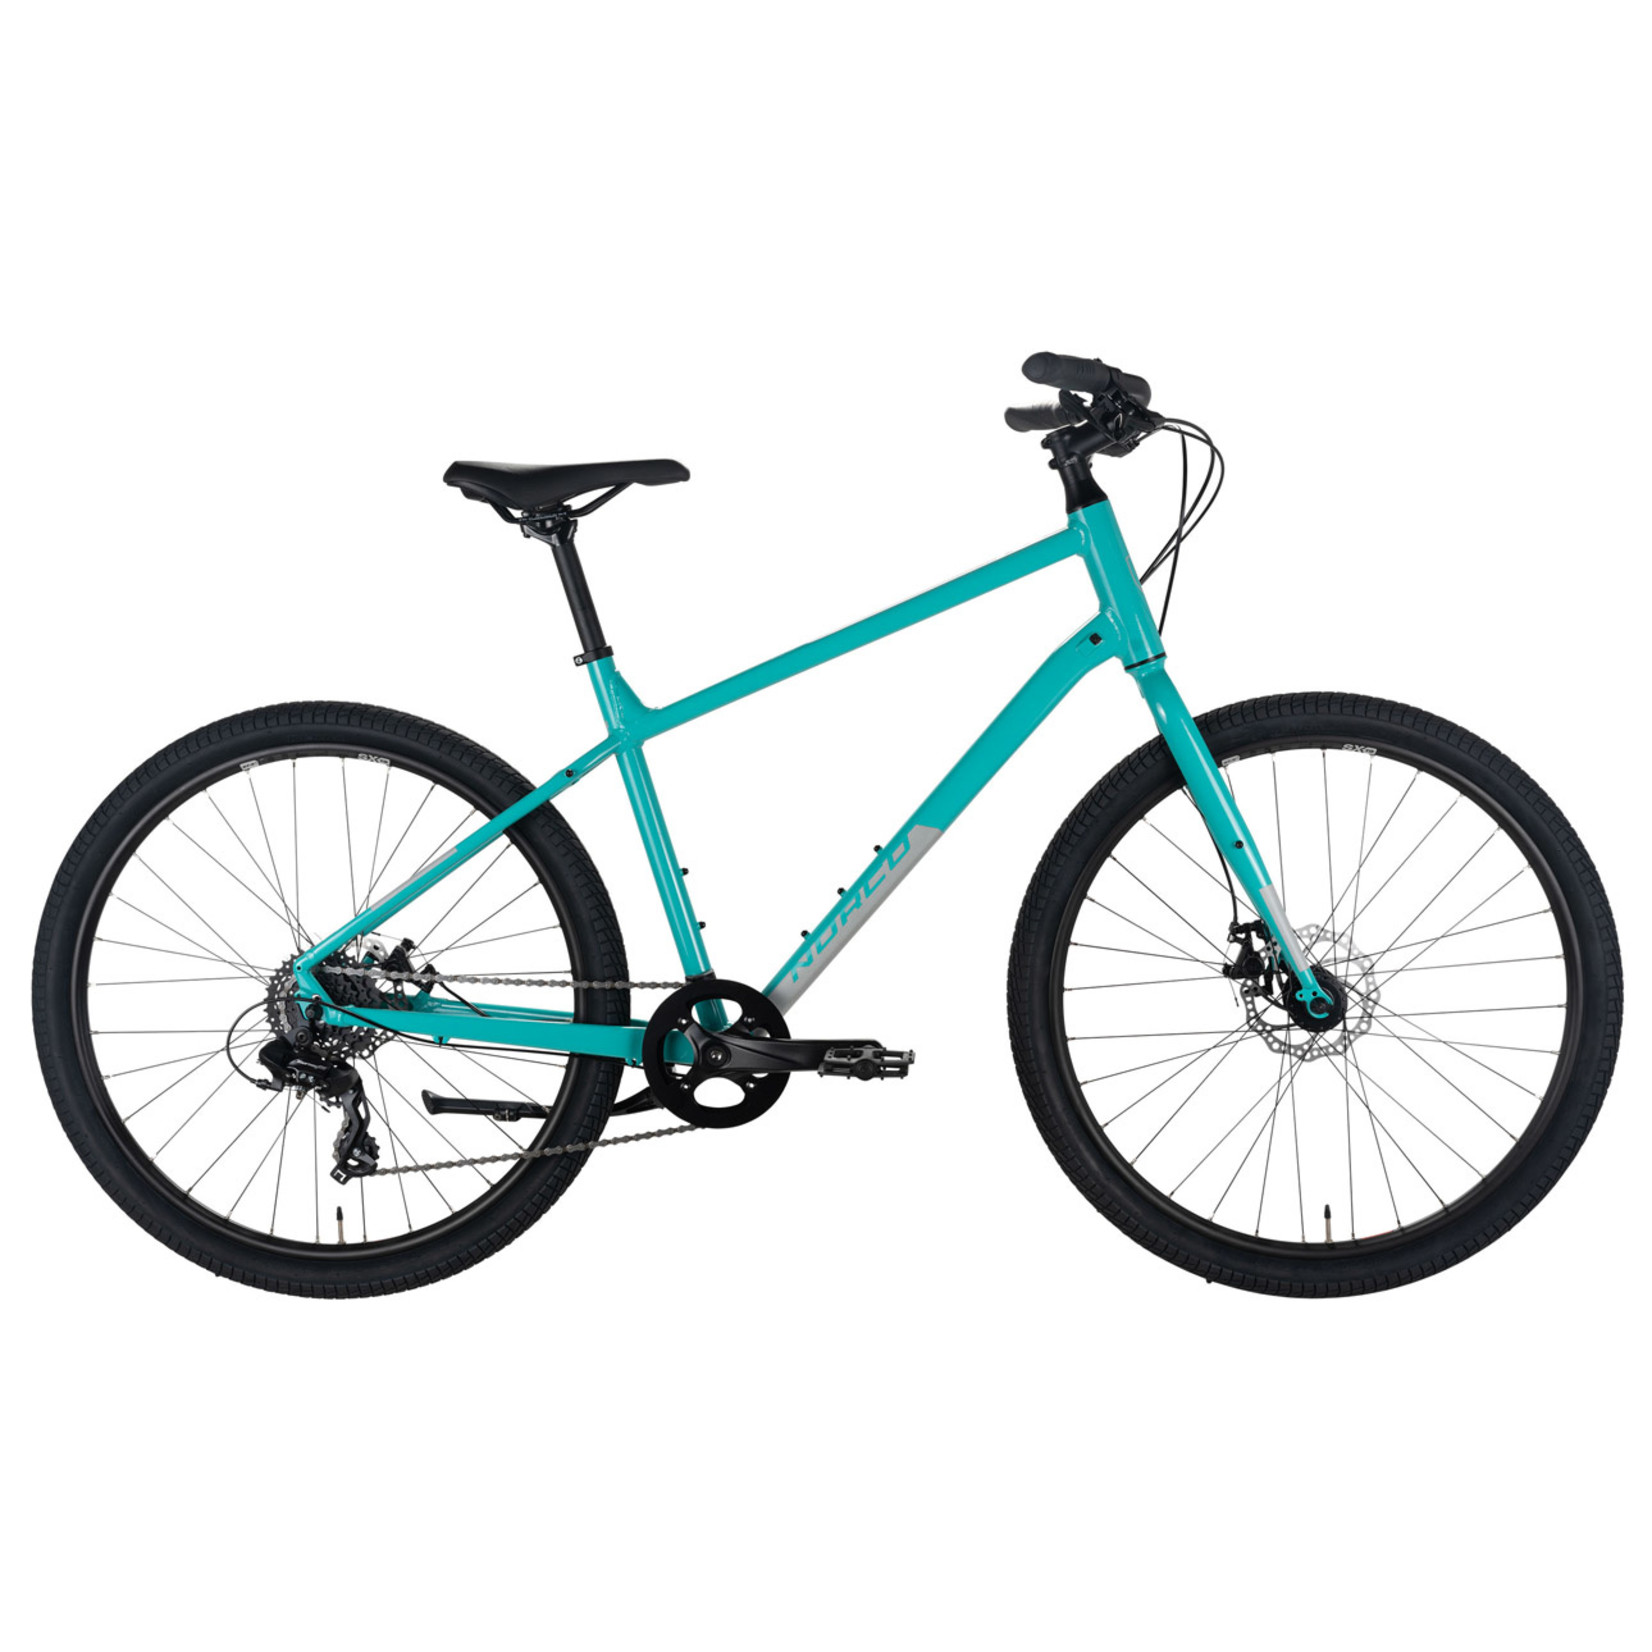 Norco Norco 2021 Indie 4 Women's Hybrid Bike - Blue/Silver - Small